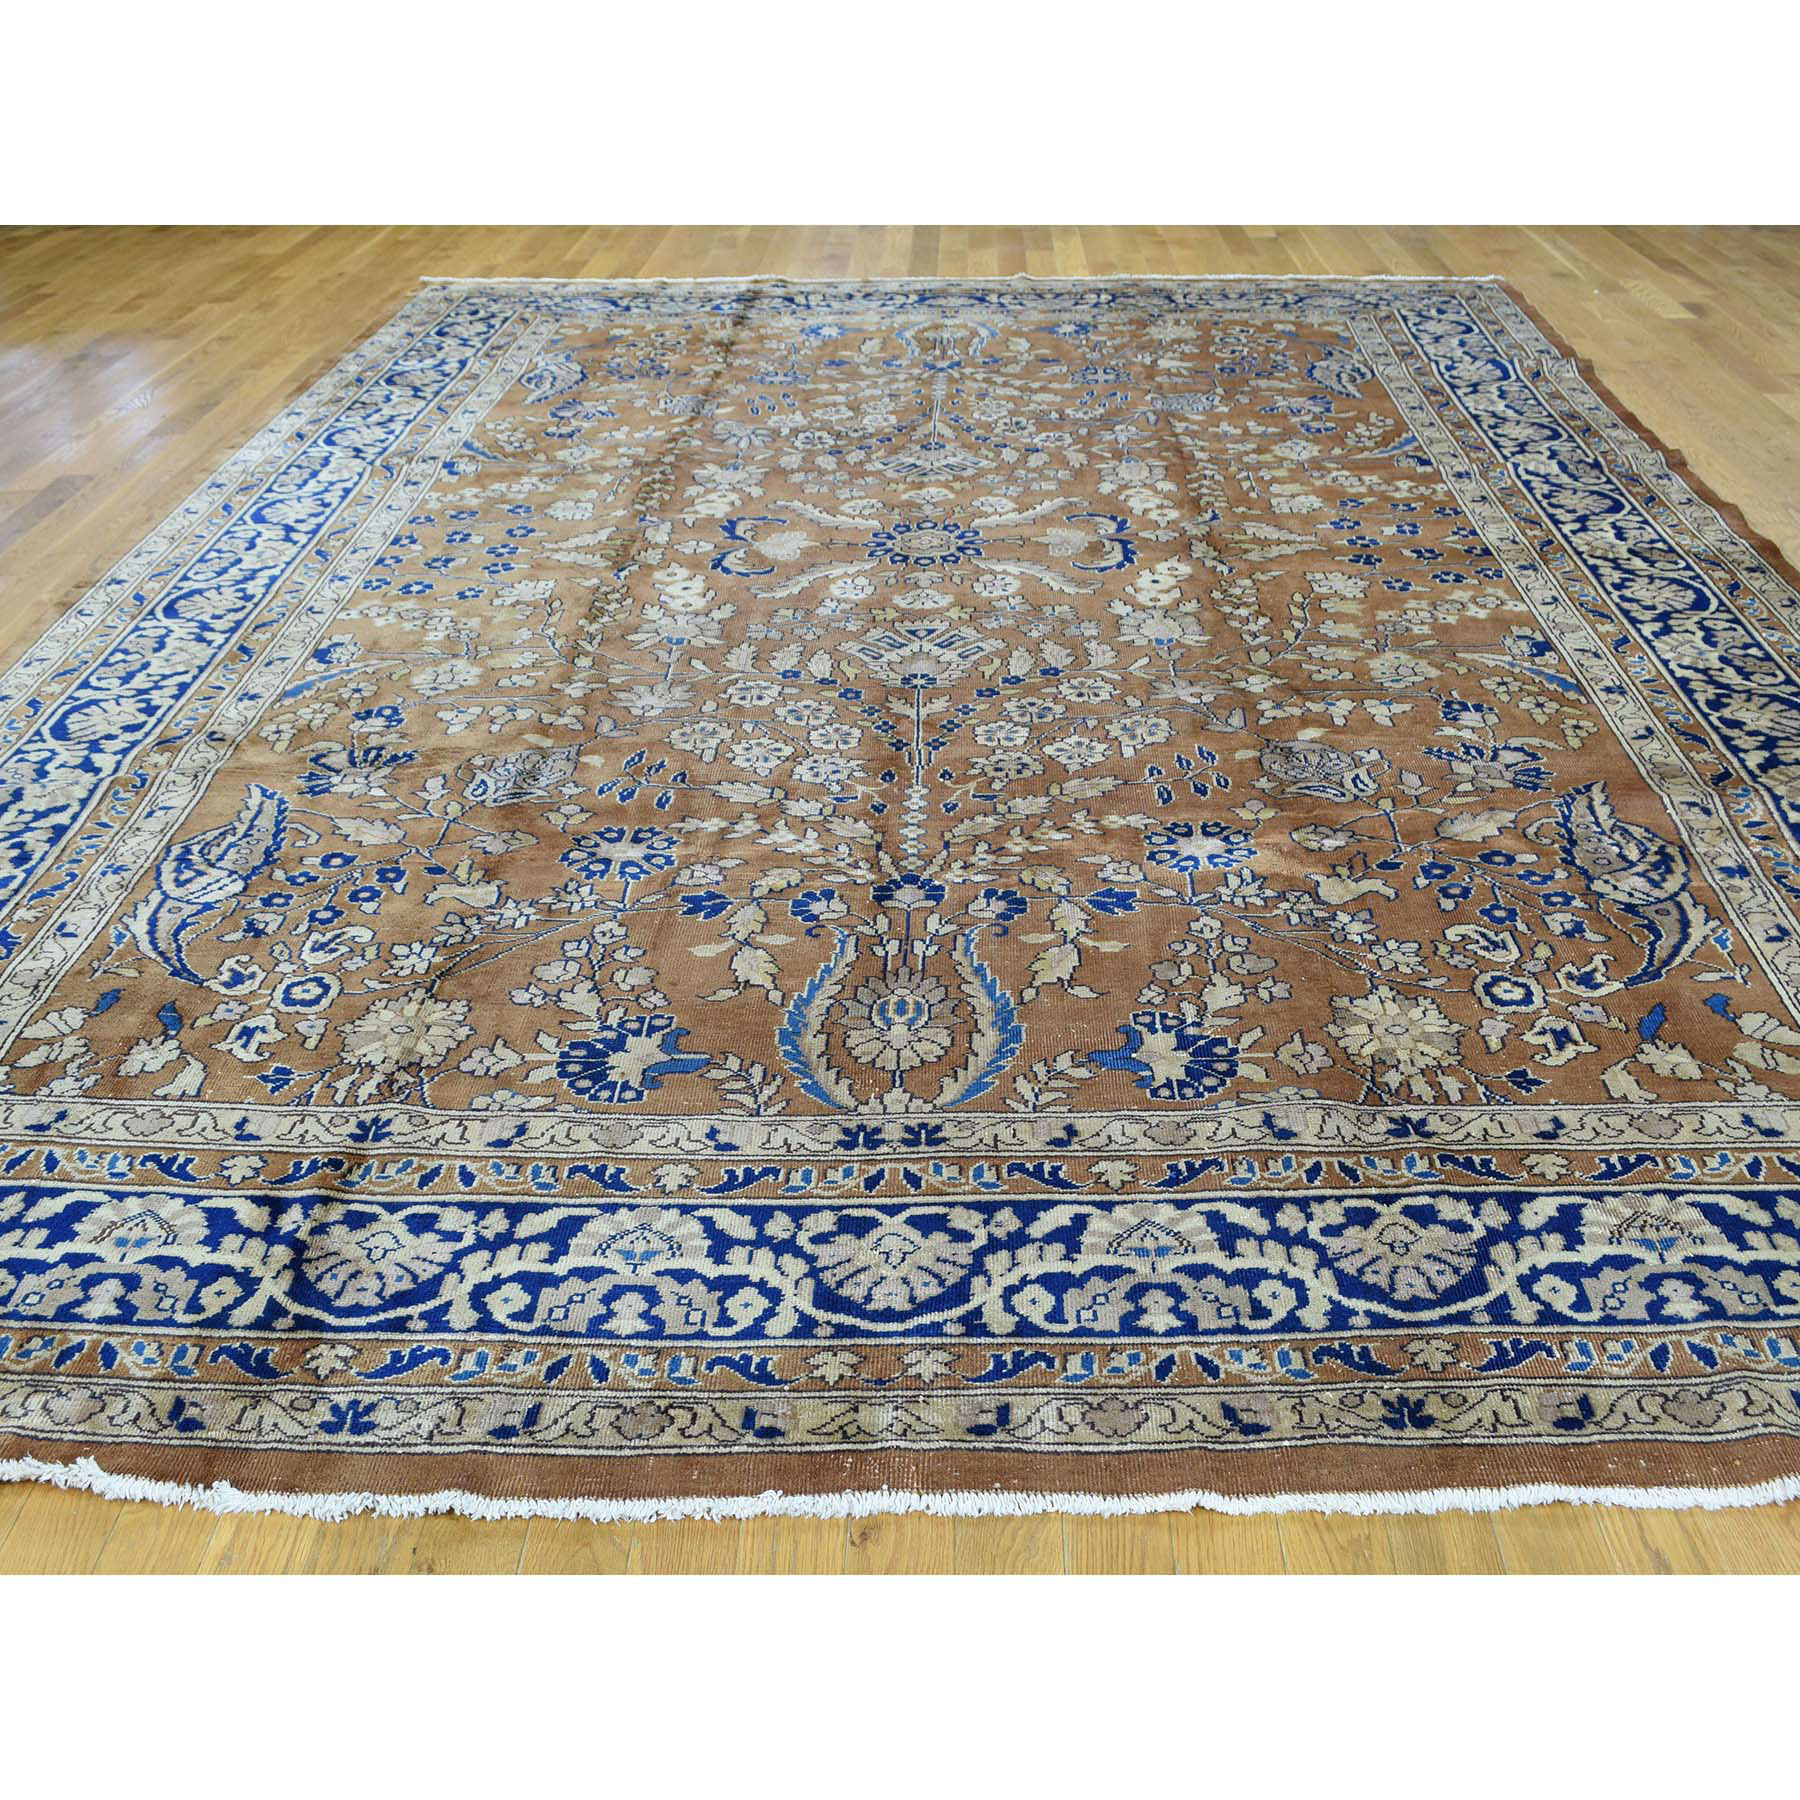 9-9 x13-3  Hand-Knotted Antique Persian Sarouk Exc Cond Oriental Rug 